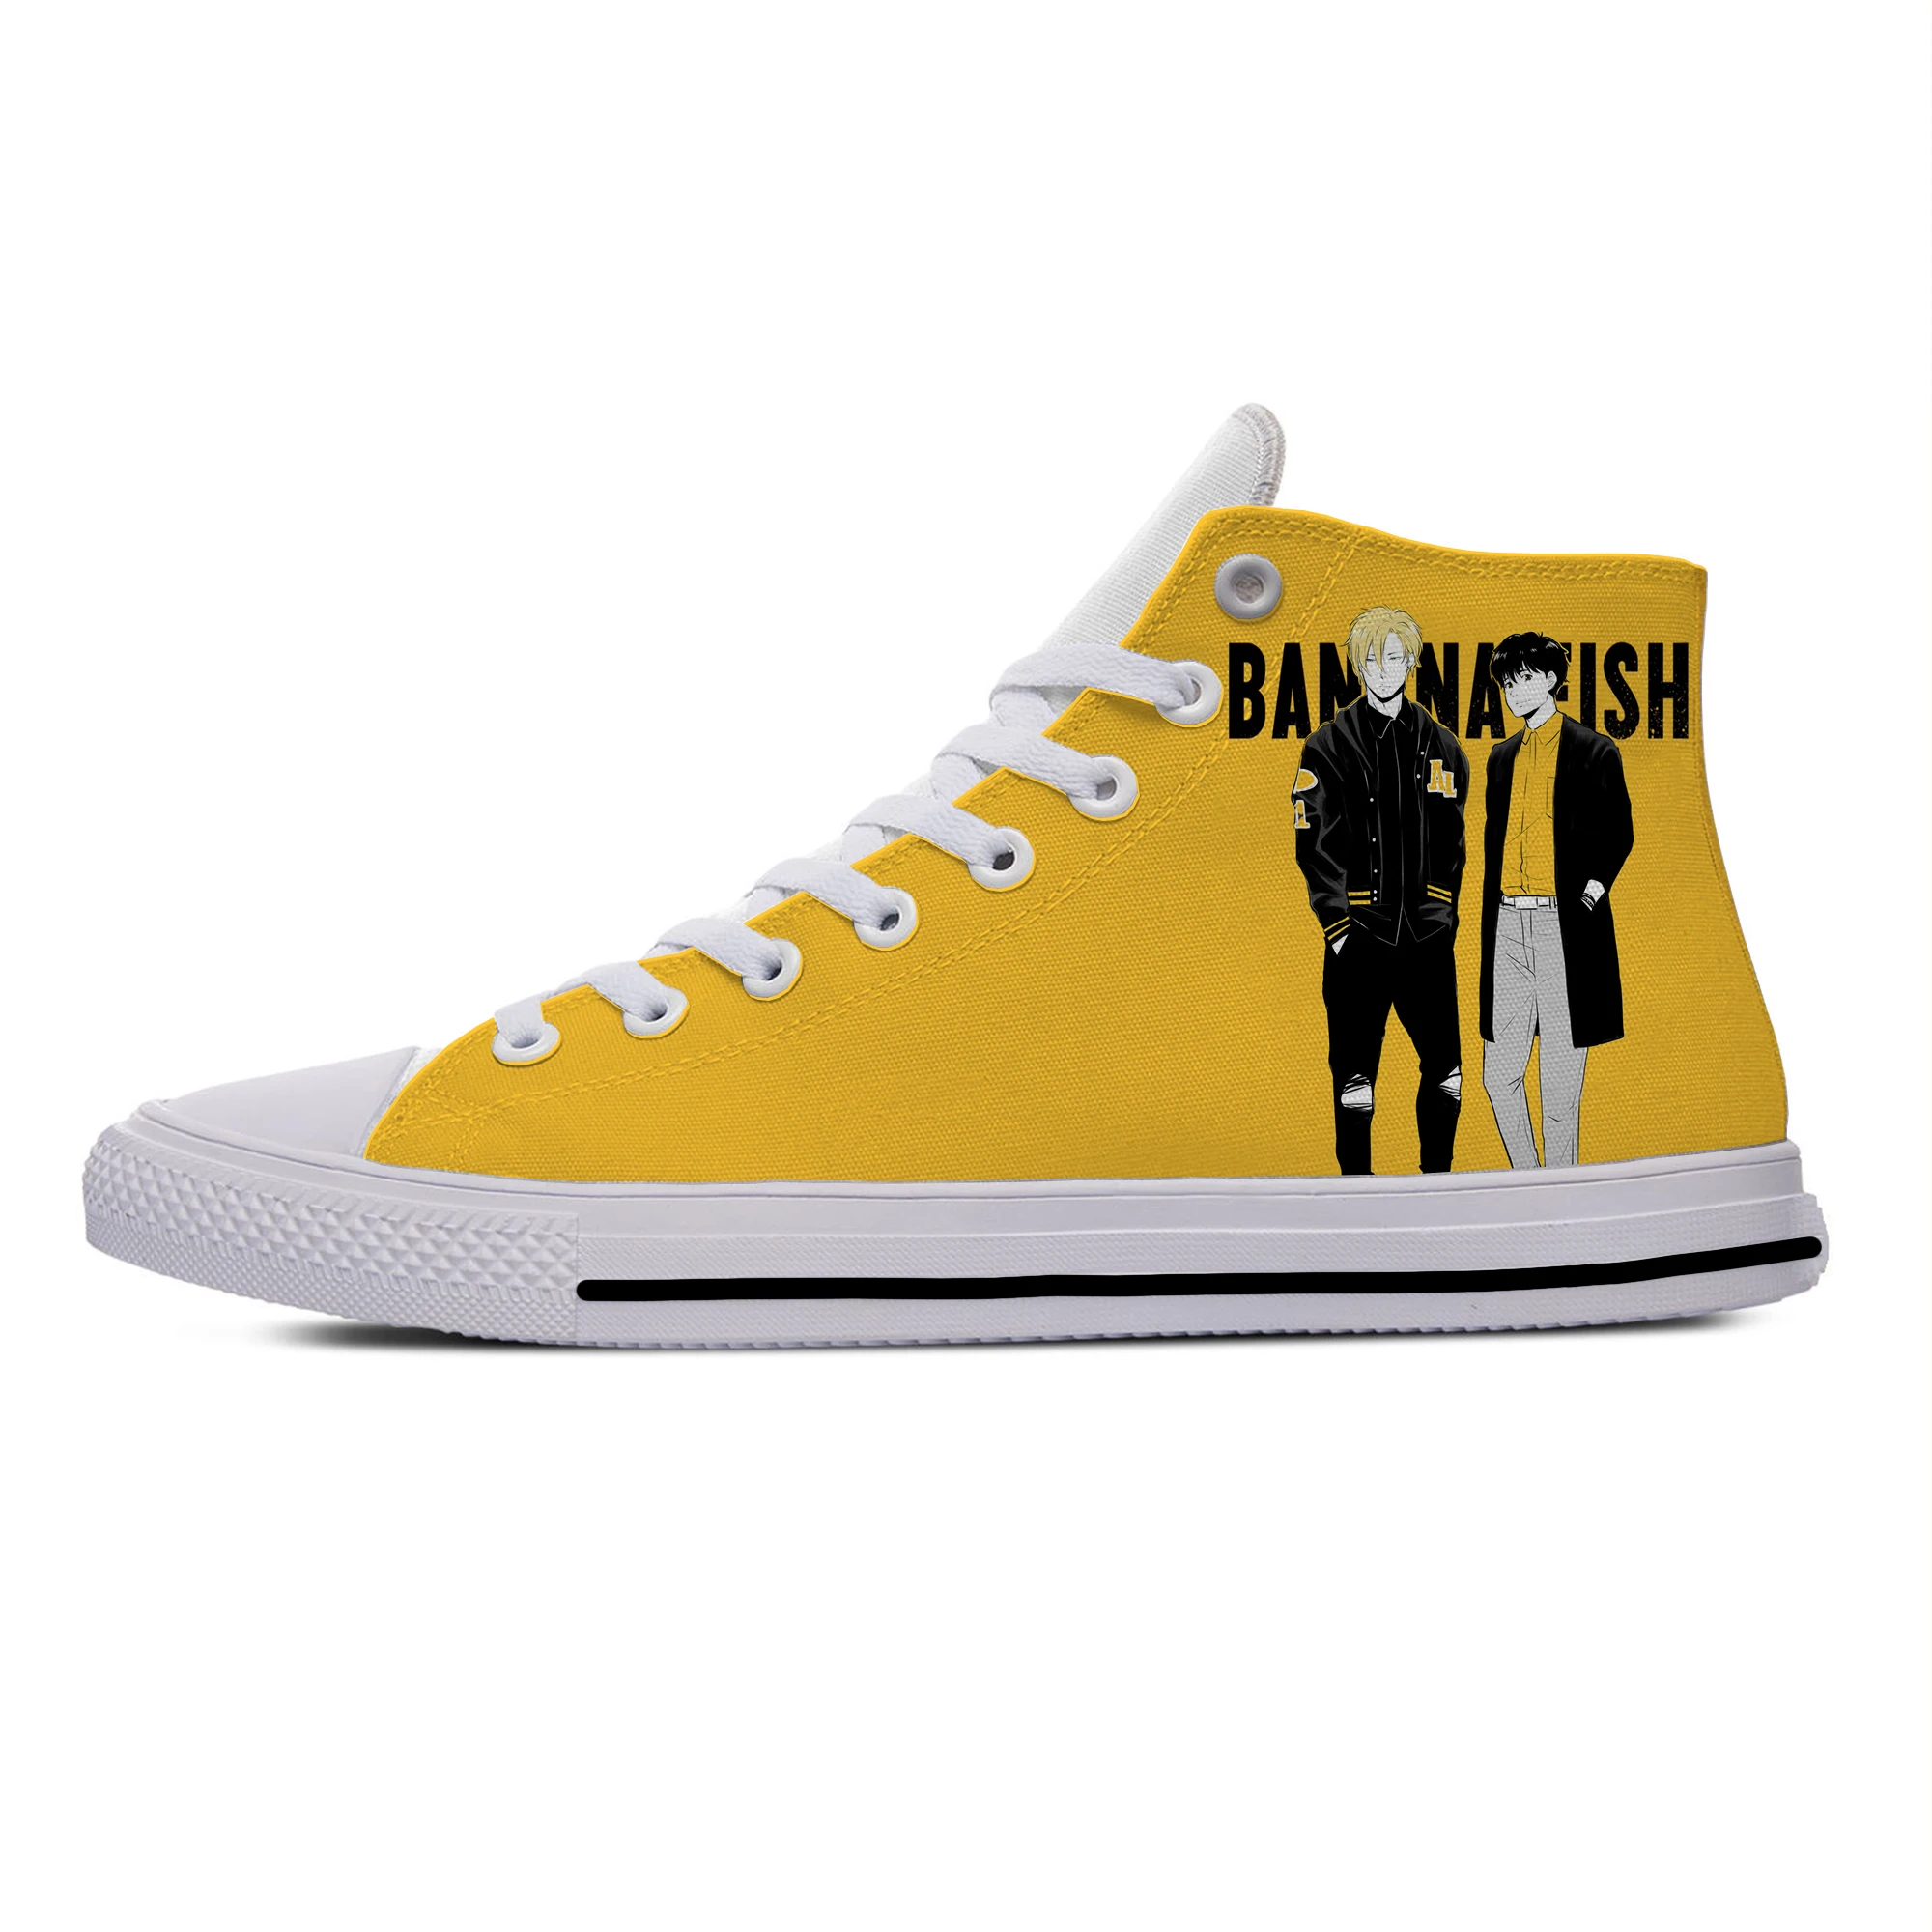 Bobs Burgers Anime Custom Hand Painted Shoes High Top Sneakers Canvas Shoes Men Women Unisex Anime Fashion Sneakers 